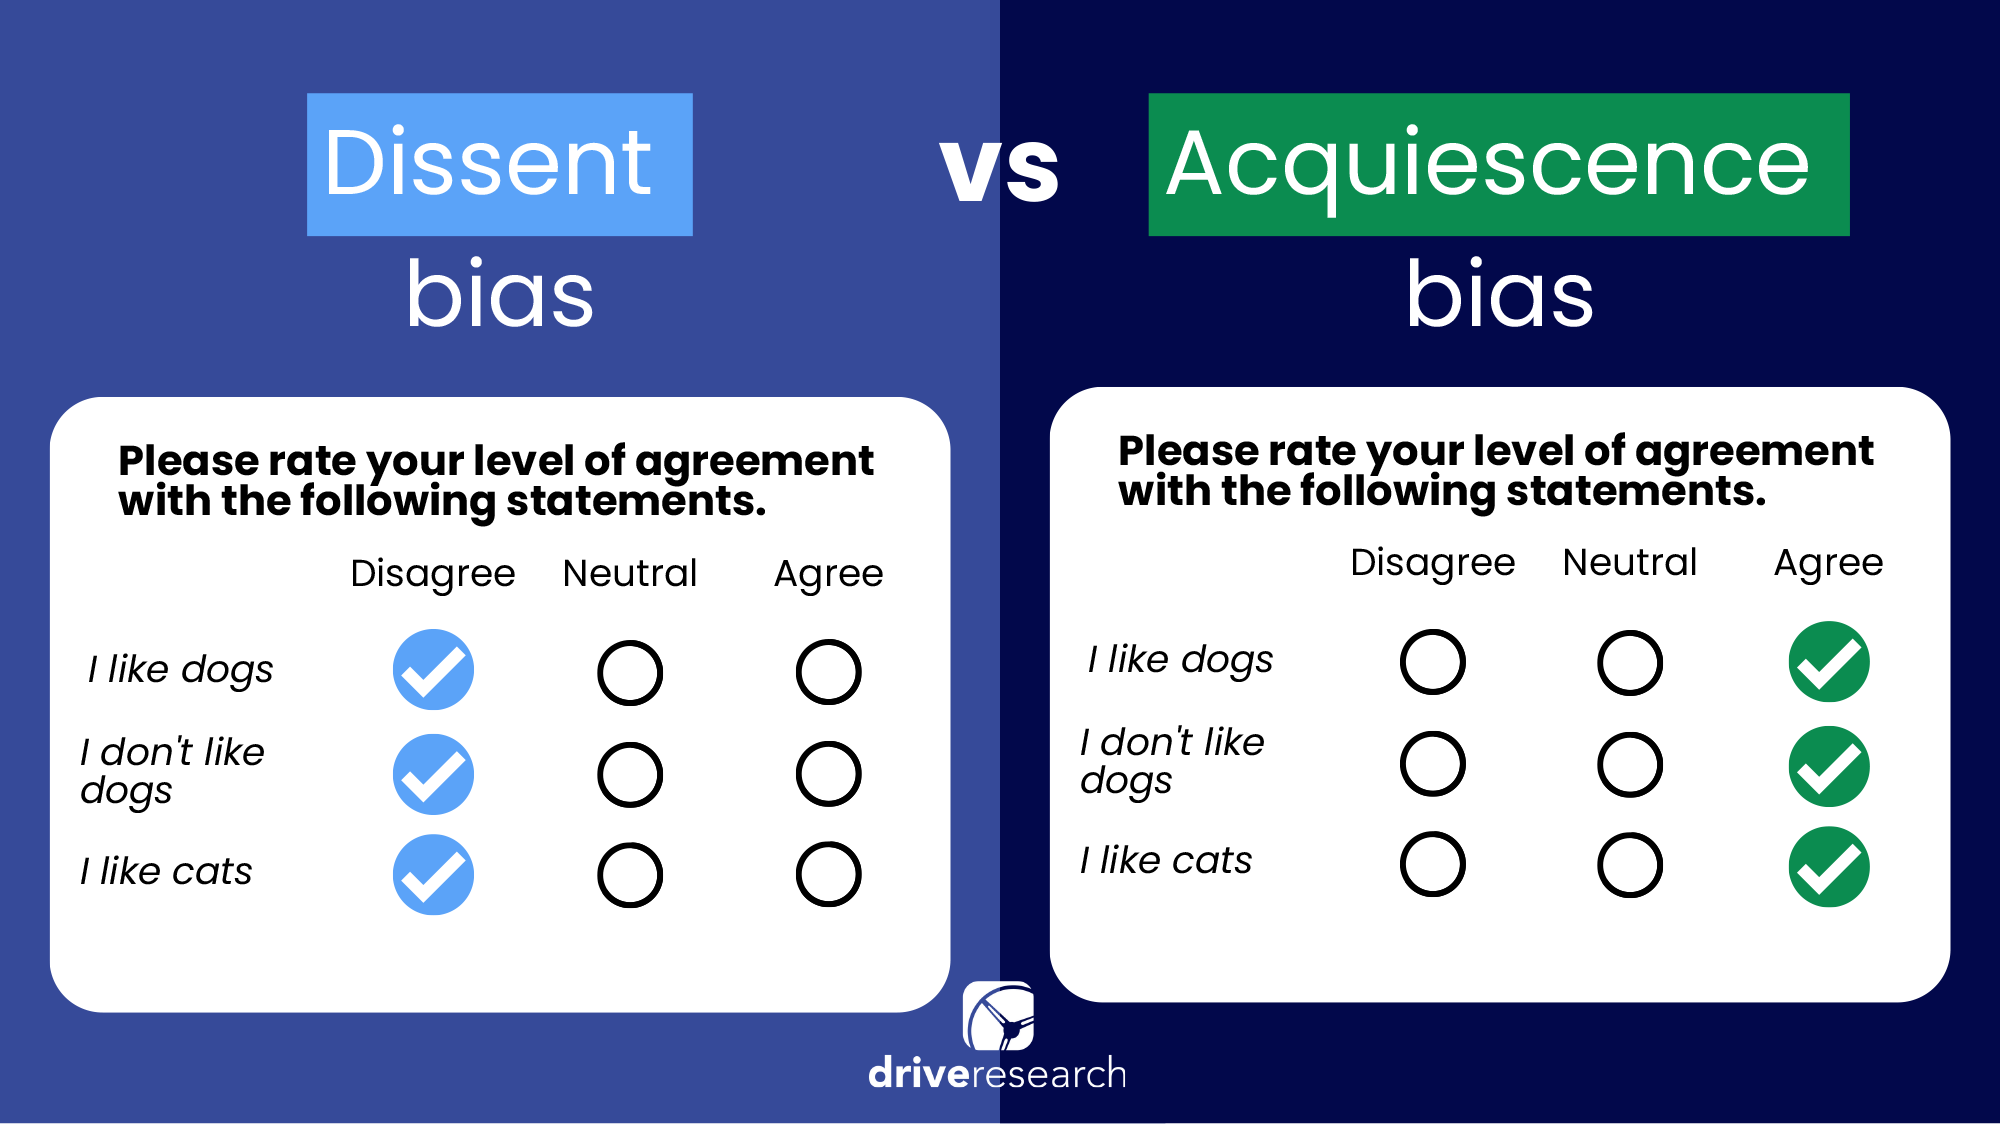 Example of dissent and acquiescence bias